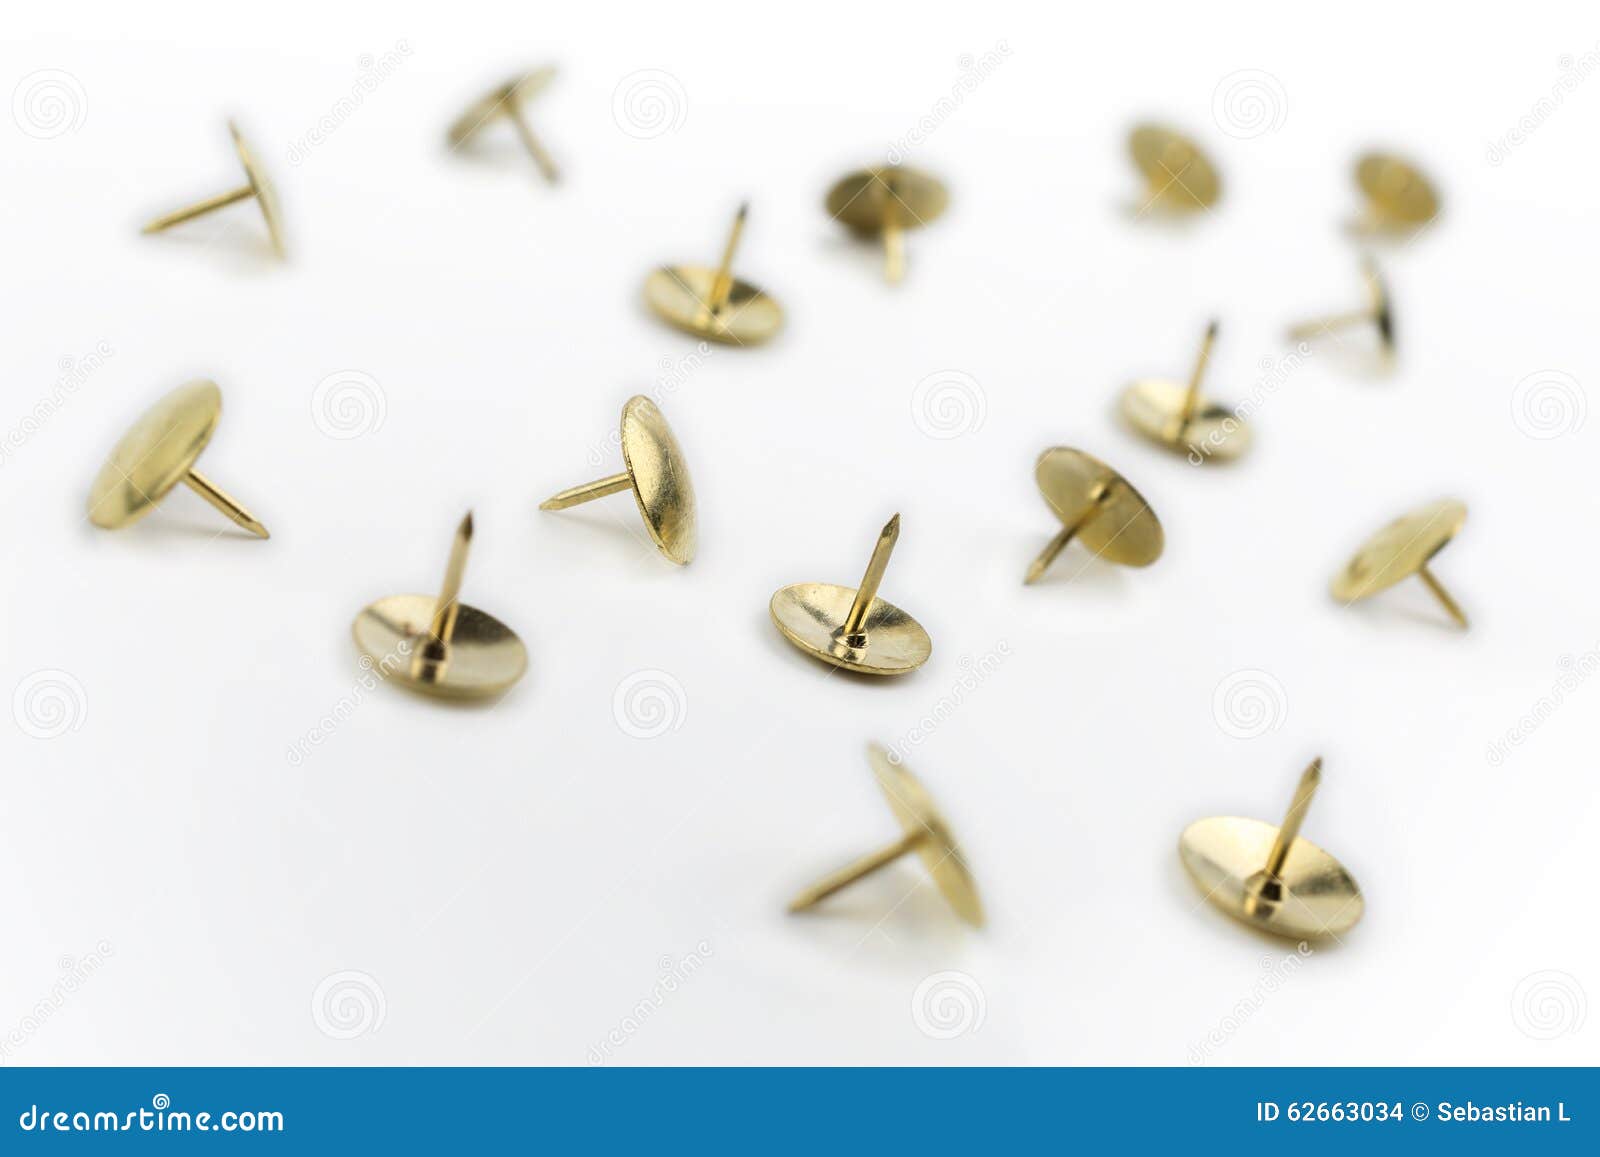 A Small Collection of Thumbtacks in a White Box #1 Stock Photo - Image ...